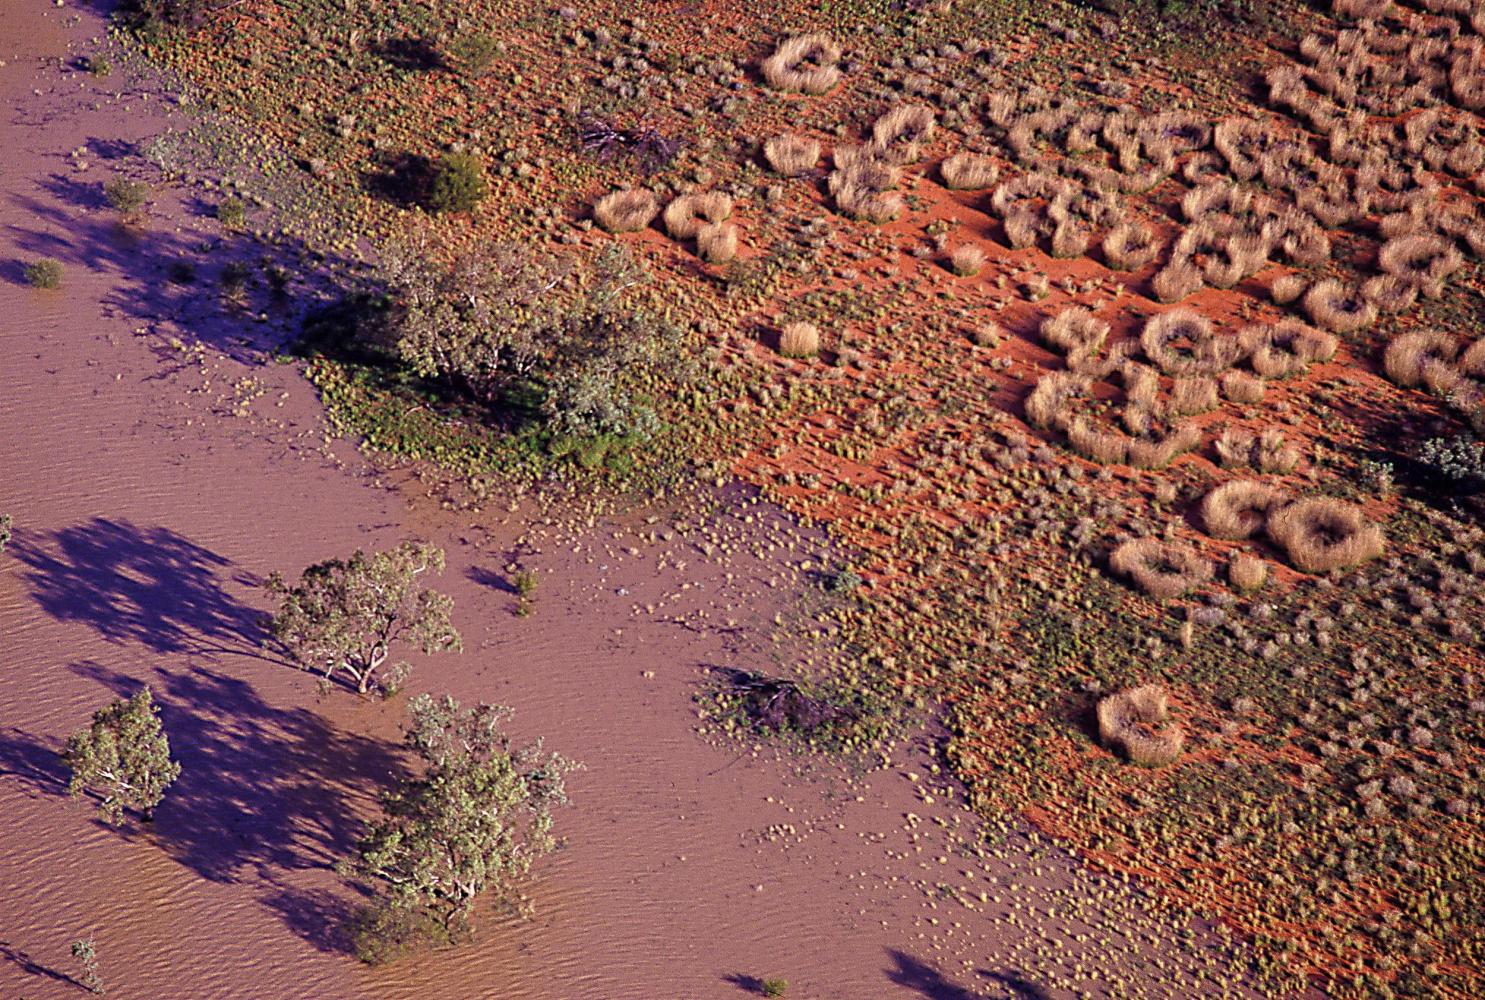 The edge of the floodwaters. Isolated gums and spinifex circles.